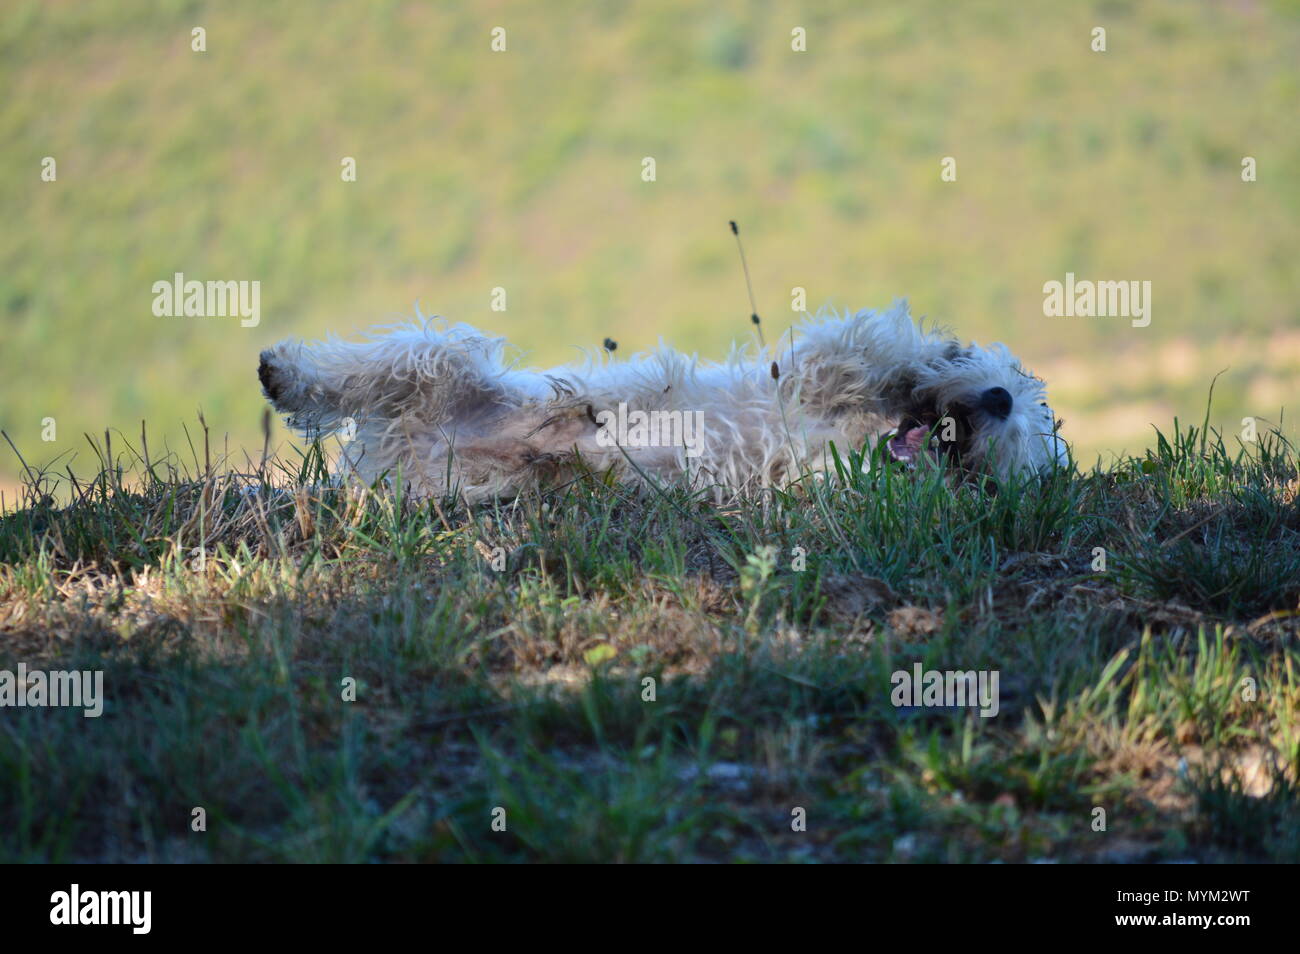 Beautiful West Highland White Terrier Dog Rotating In Rebedul Meadows In Lugo. Animals Landscapes Nature. August 18, 2016. Rebedul Becerrea Lugo Galic Stock Photo